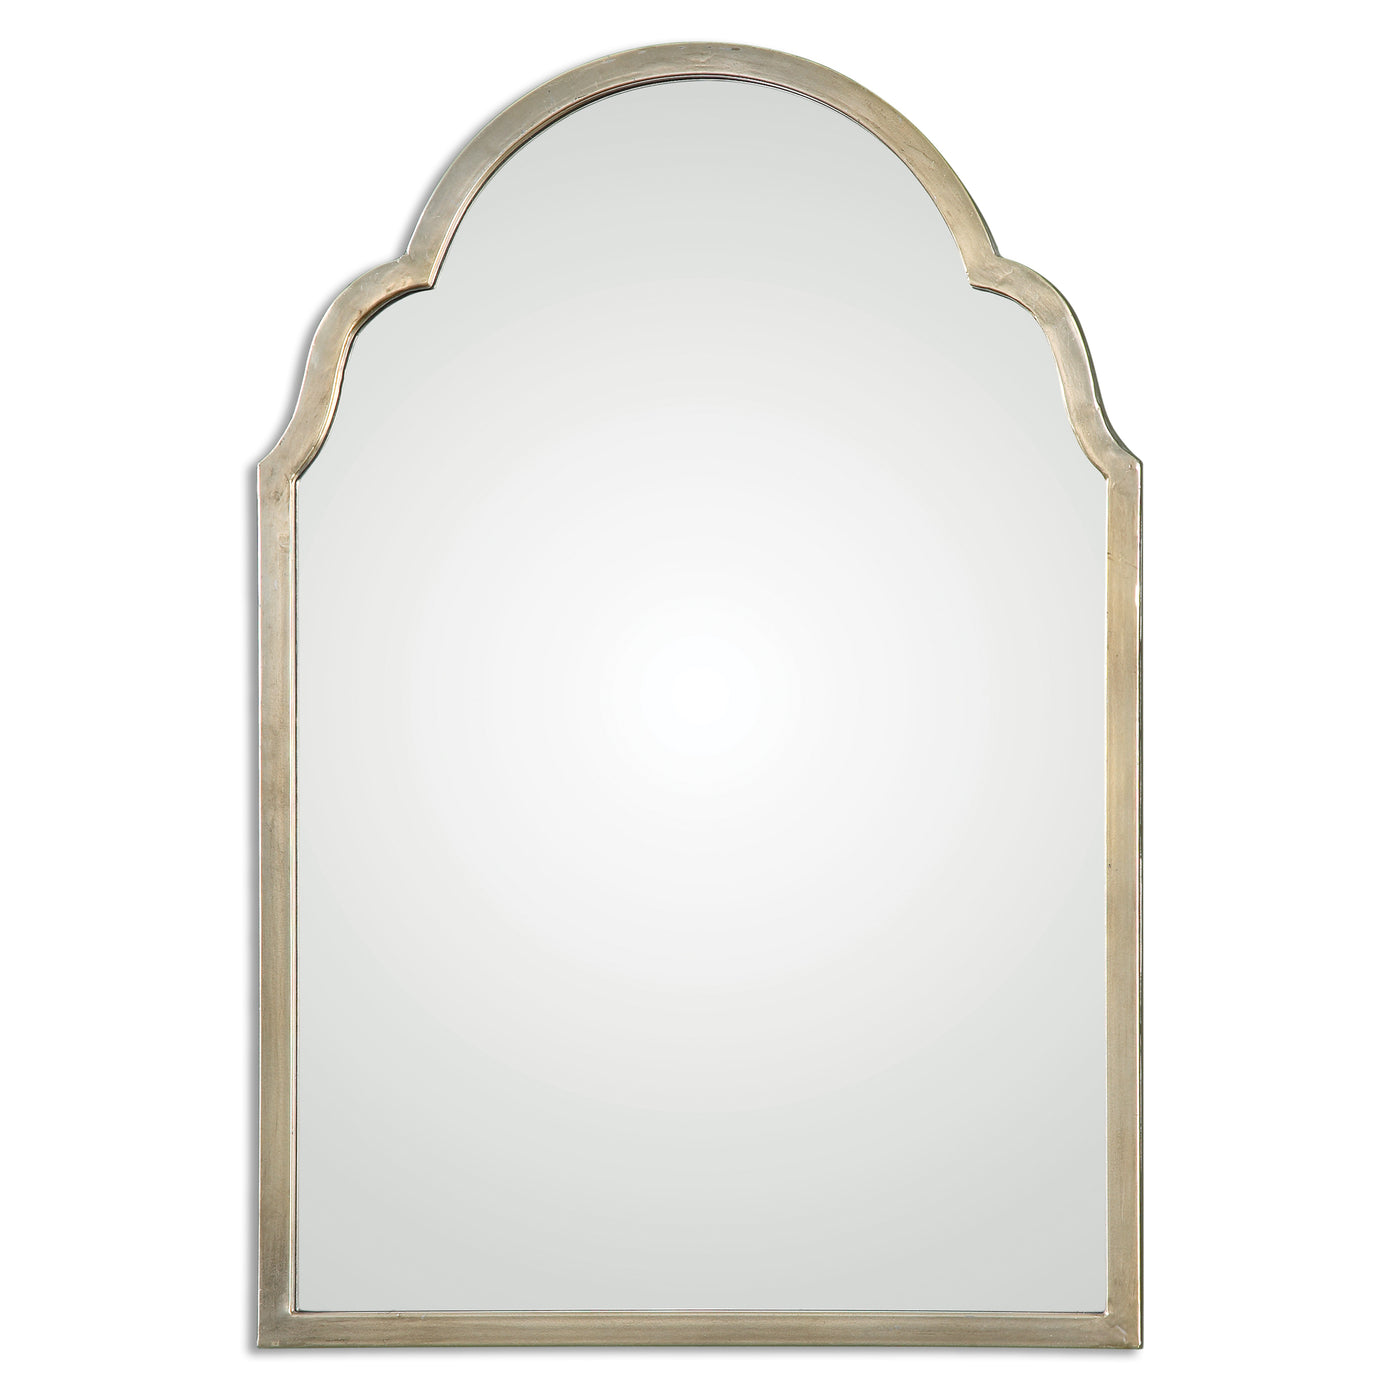 Hand Forged, Metal Frame Finished In A Lightly Antiqued Silver Champagne.